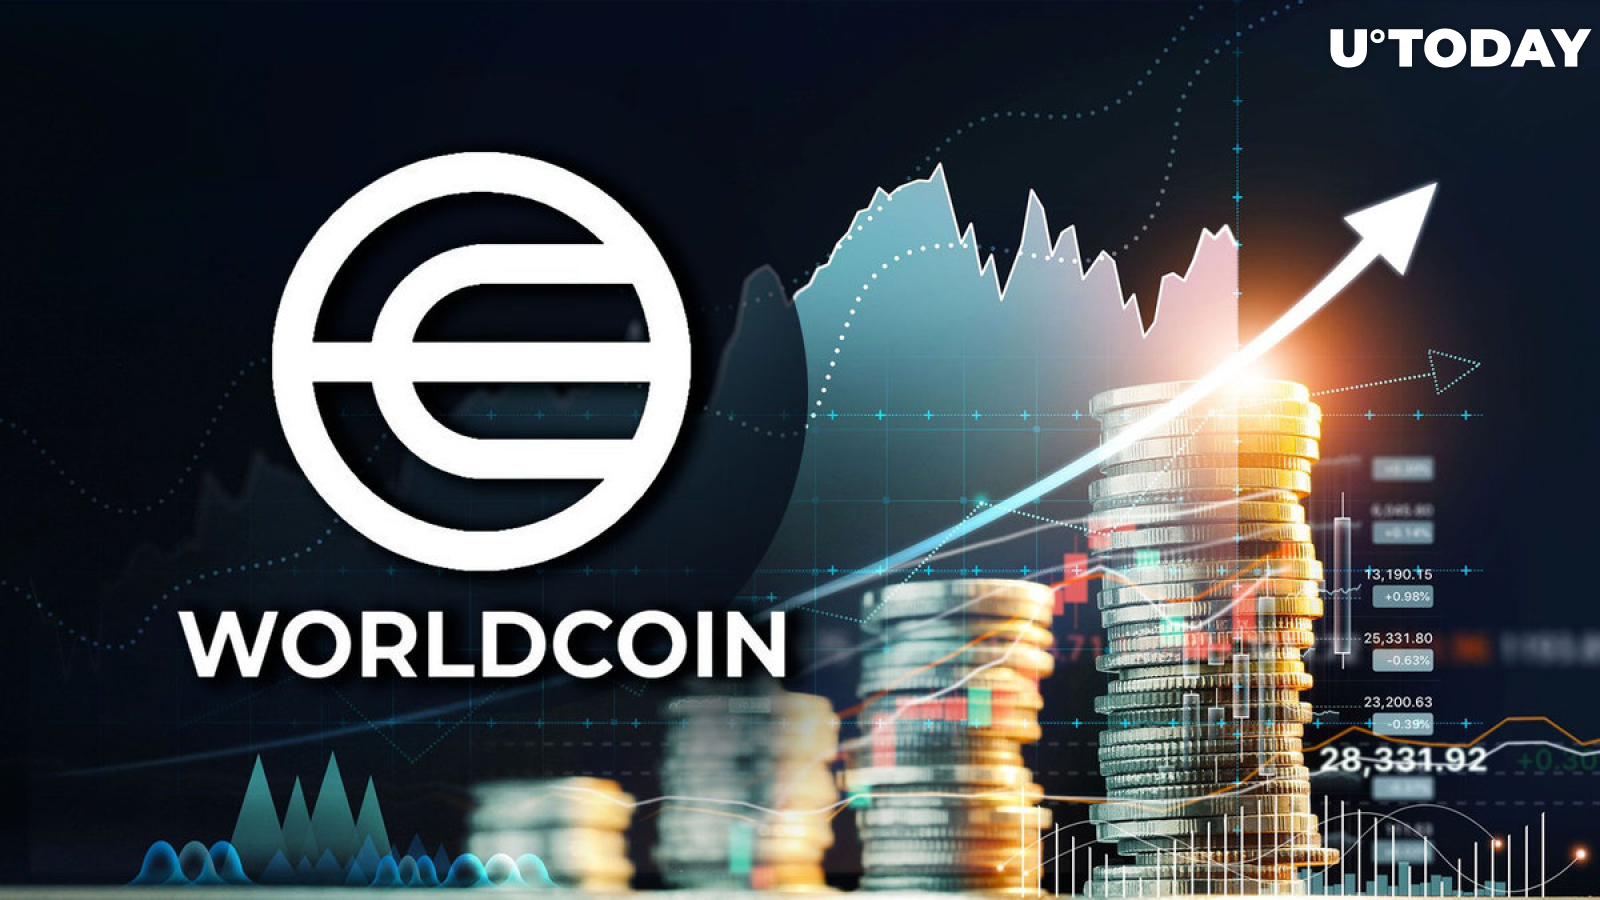 Worldcoin (WLD) Up 36%, What Is Driving This Bullish Run?